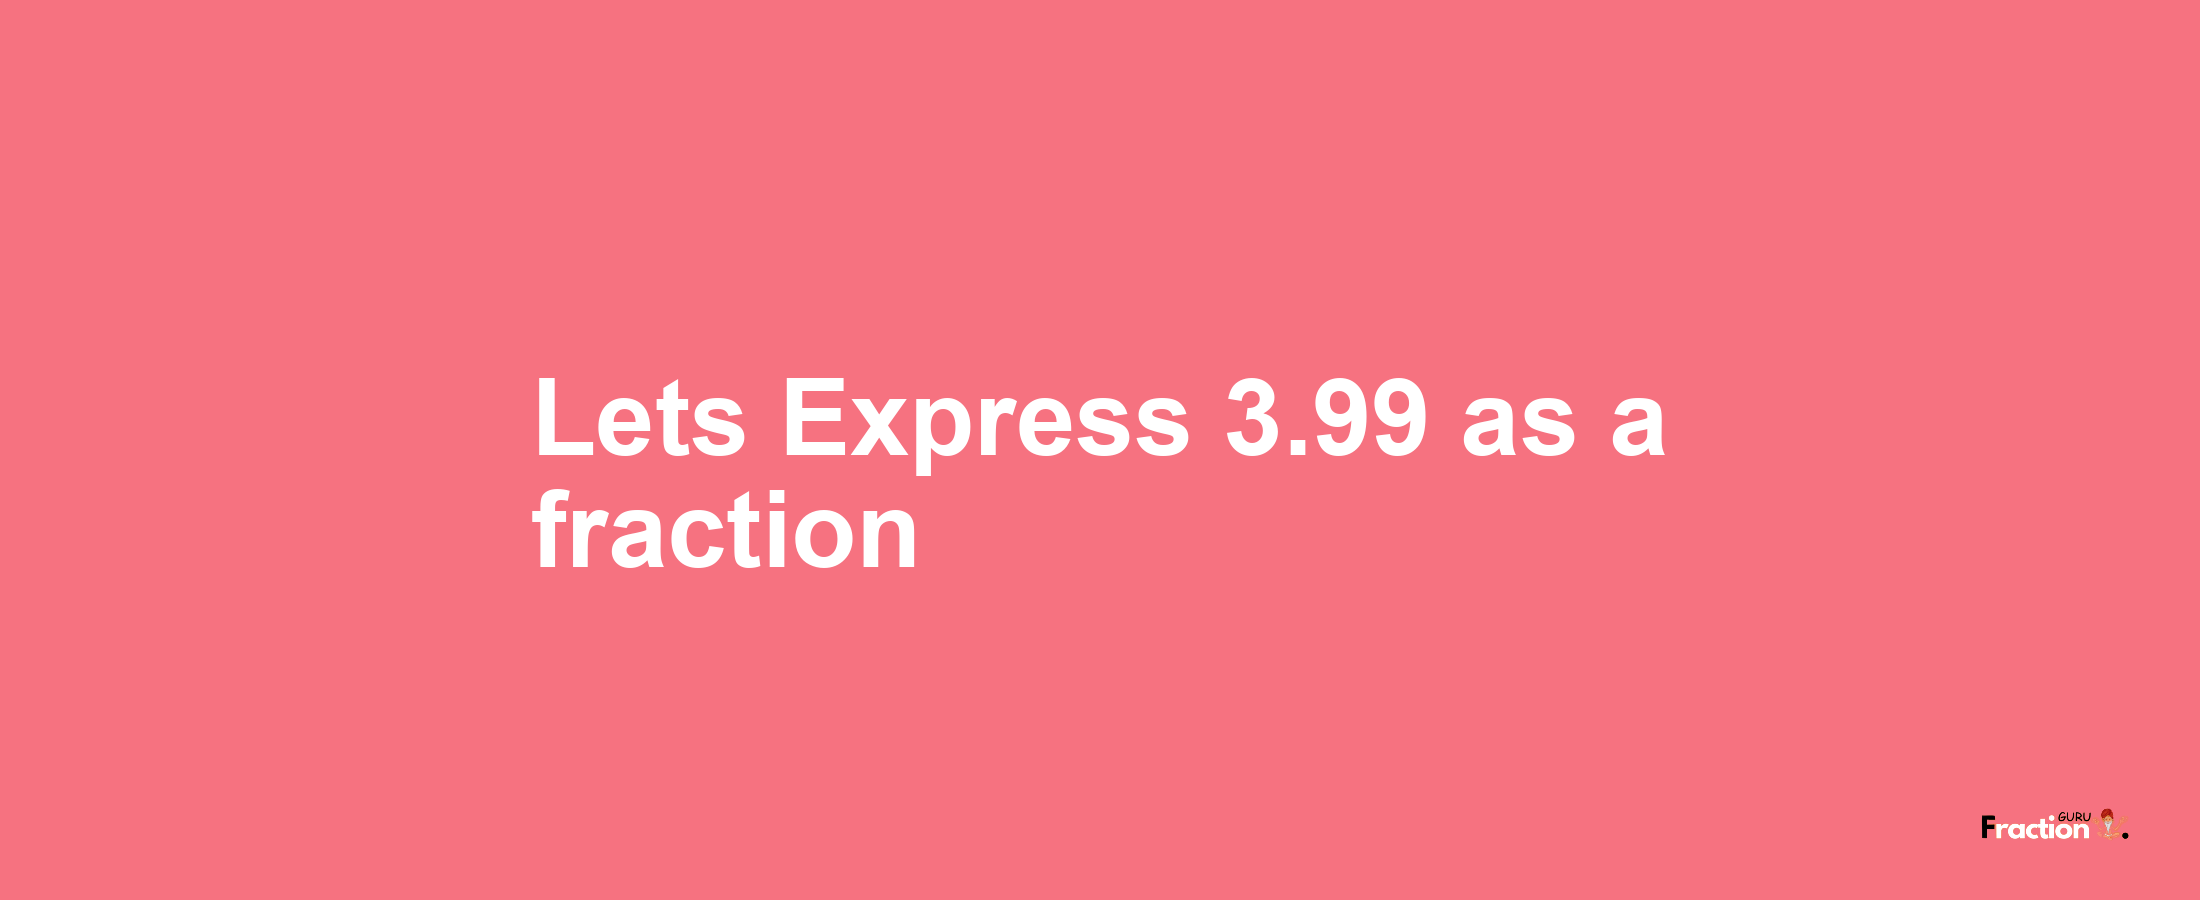 Lets Express 3.99 as afraction